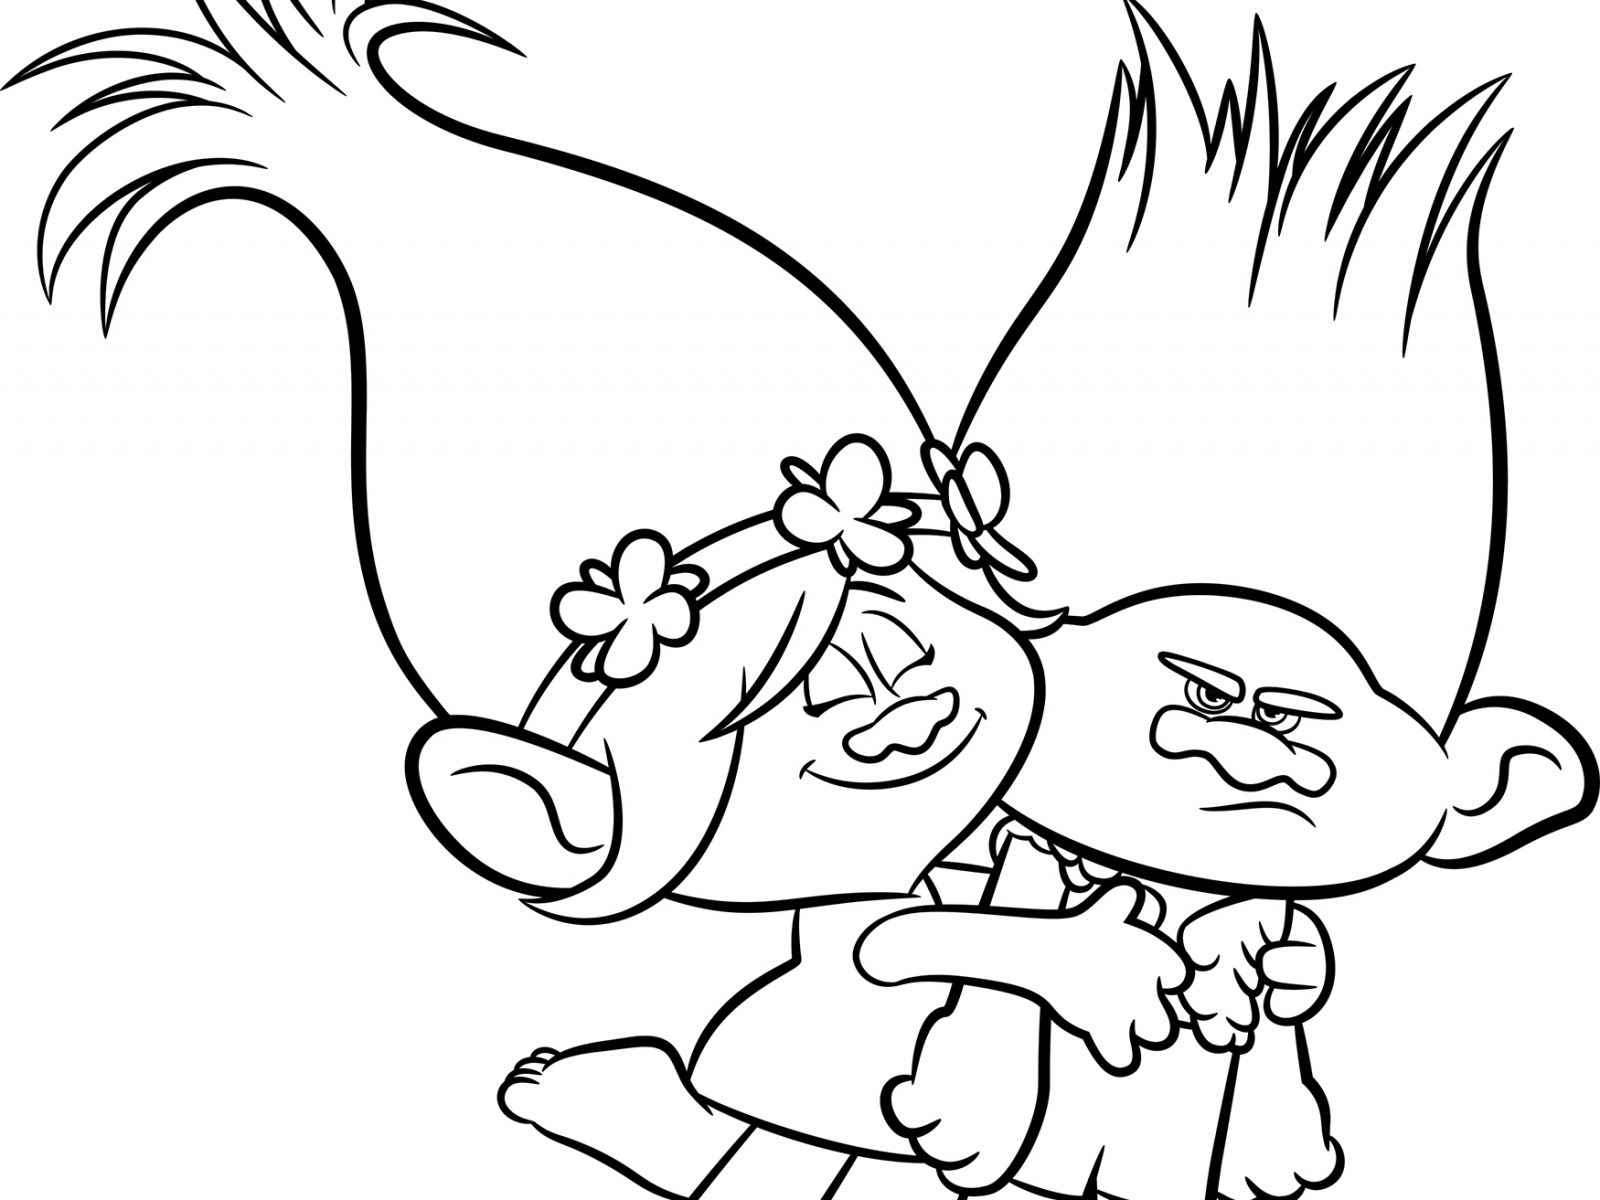 Troll Hunter Coloring Pages at GetColorings.com | Free printable